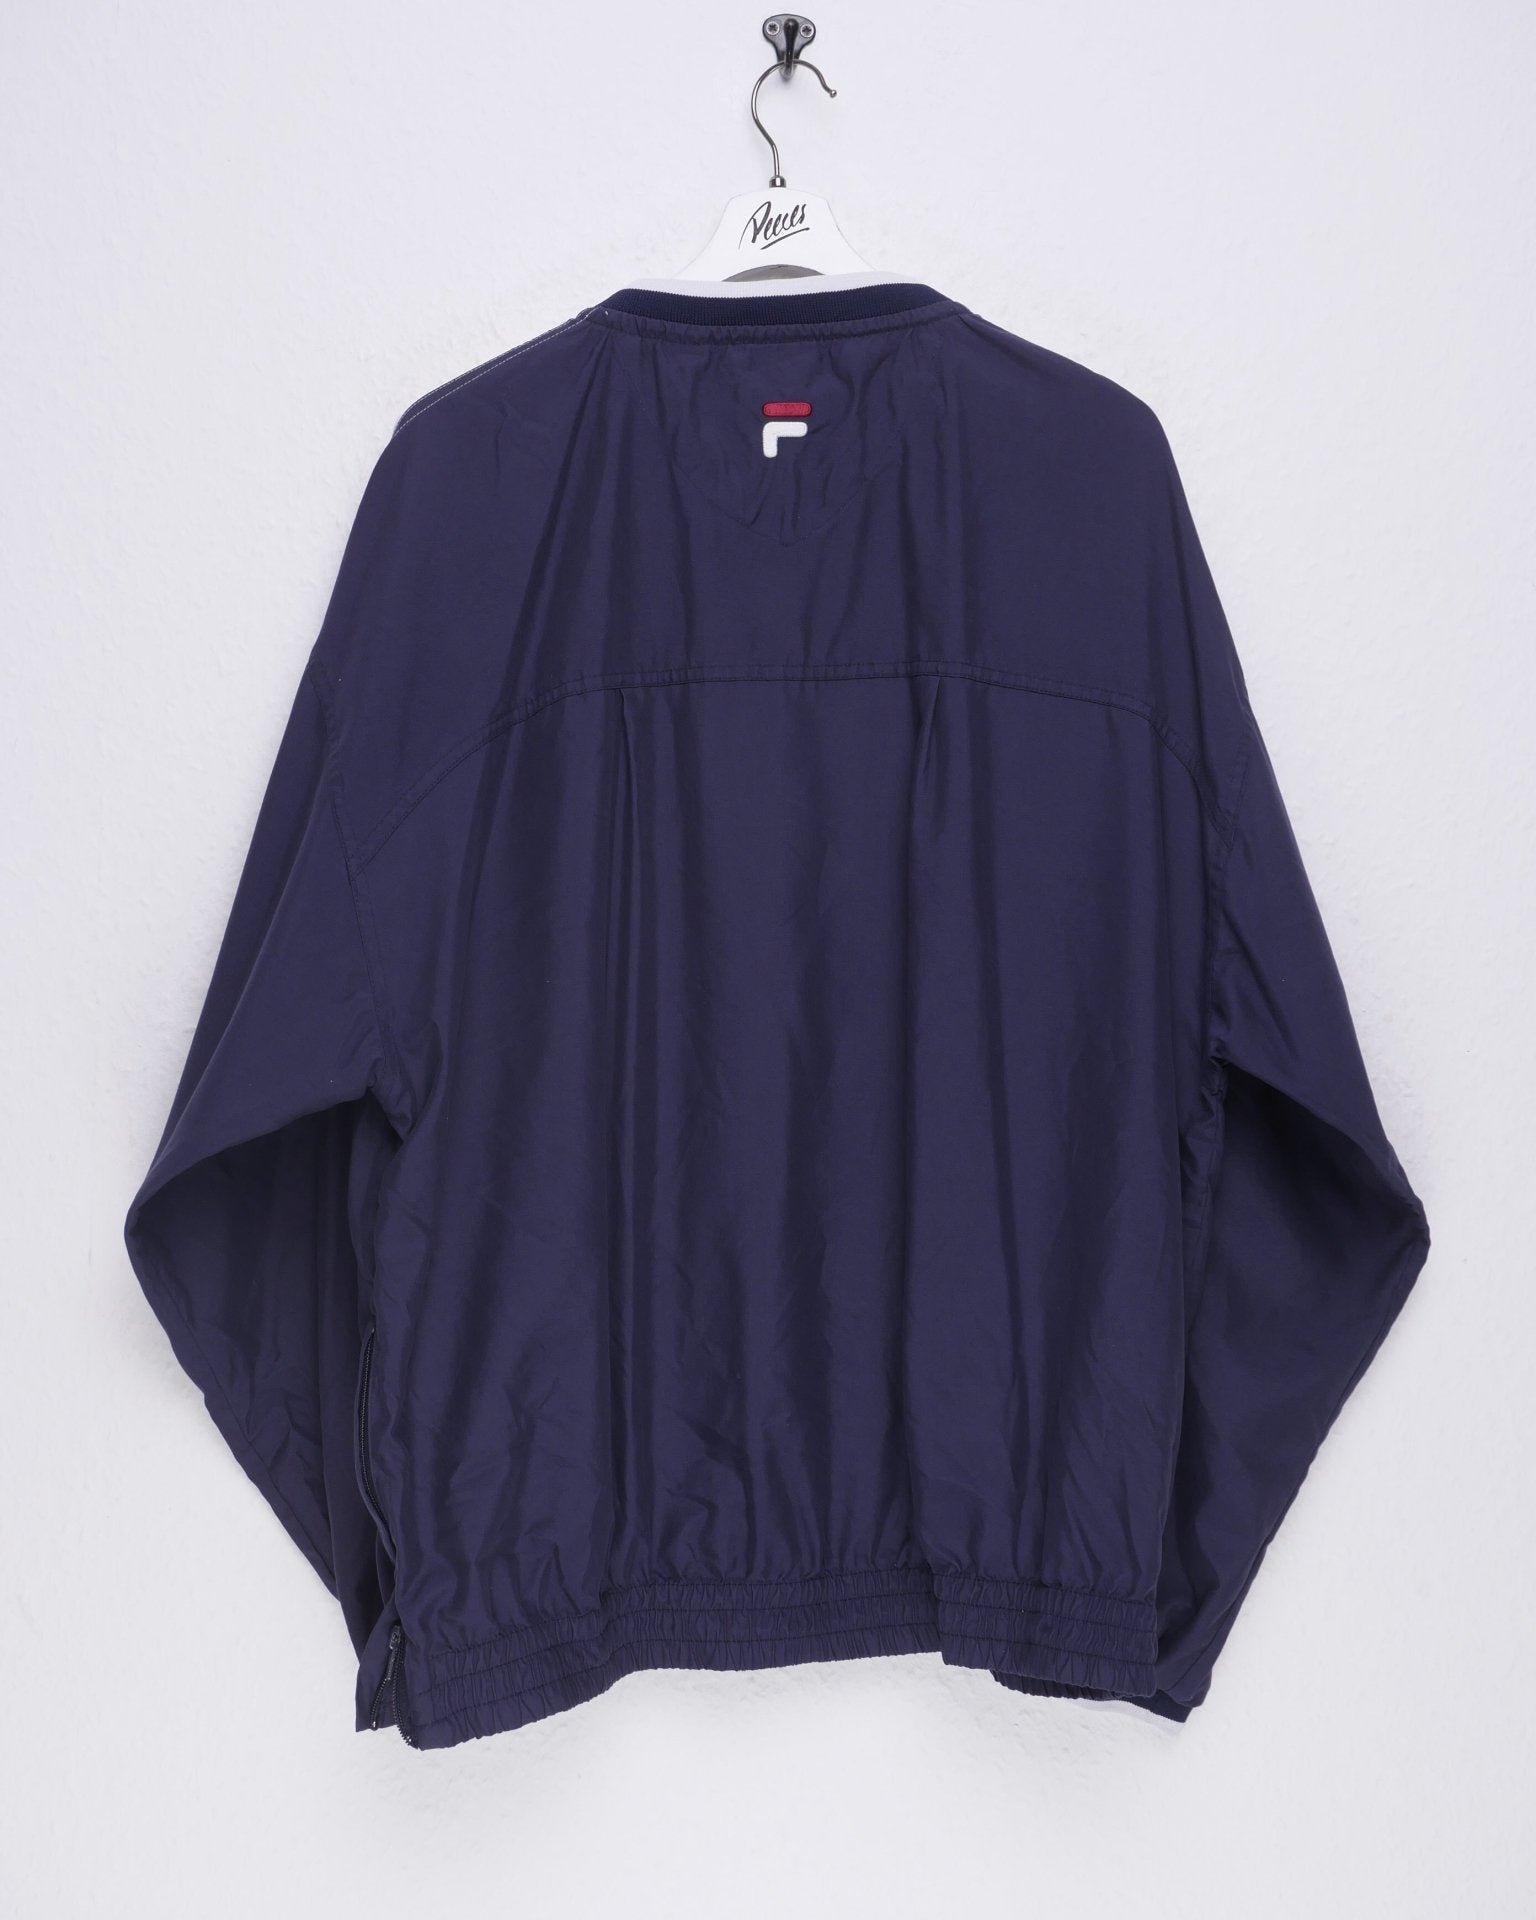 Fila embroidered Logo navy Jersey Sweater - Peeces